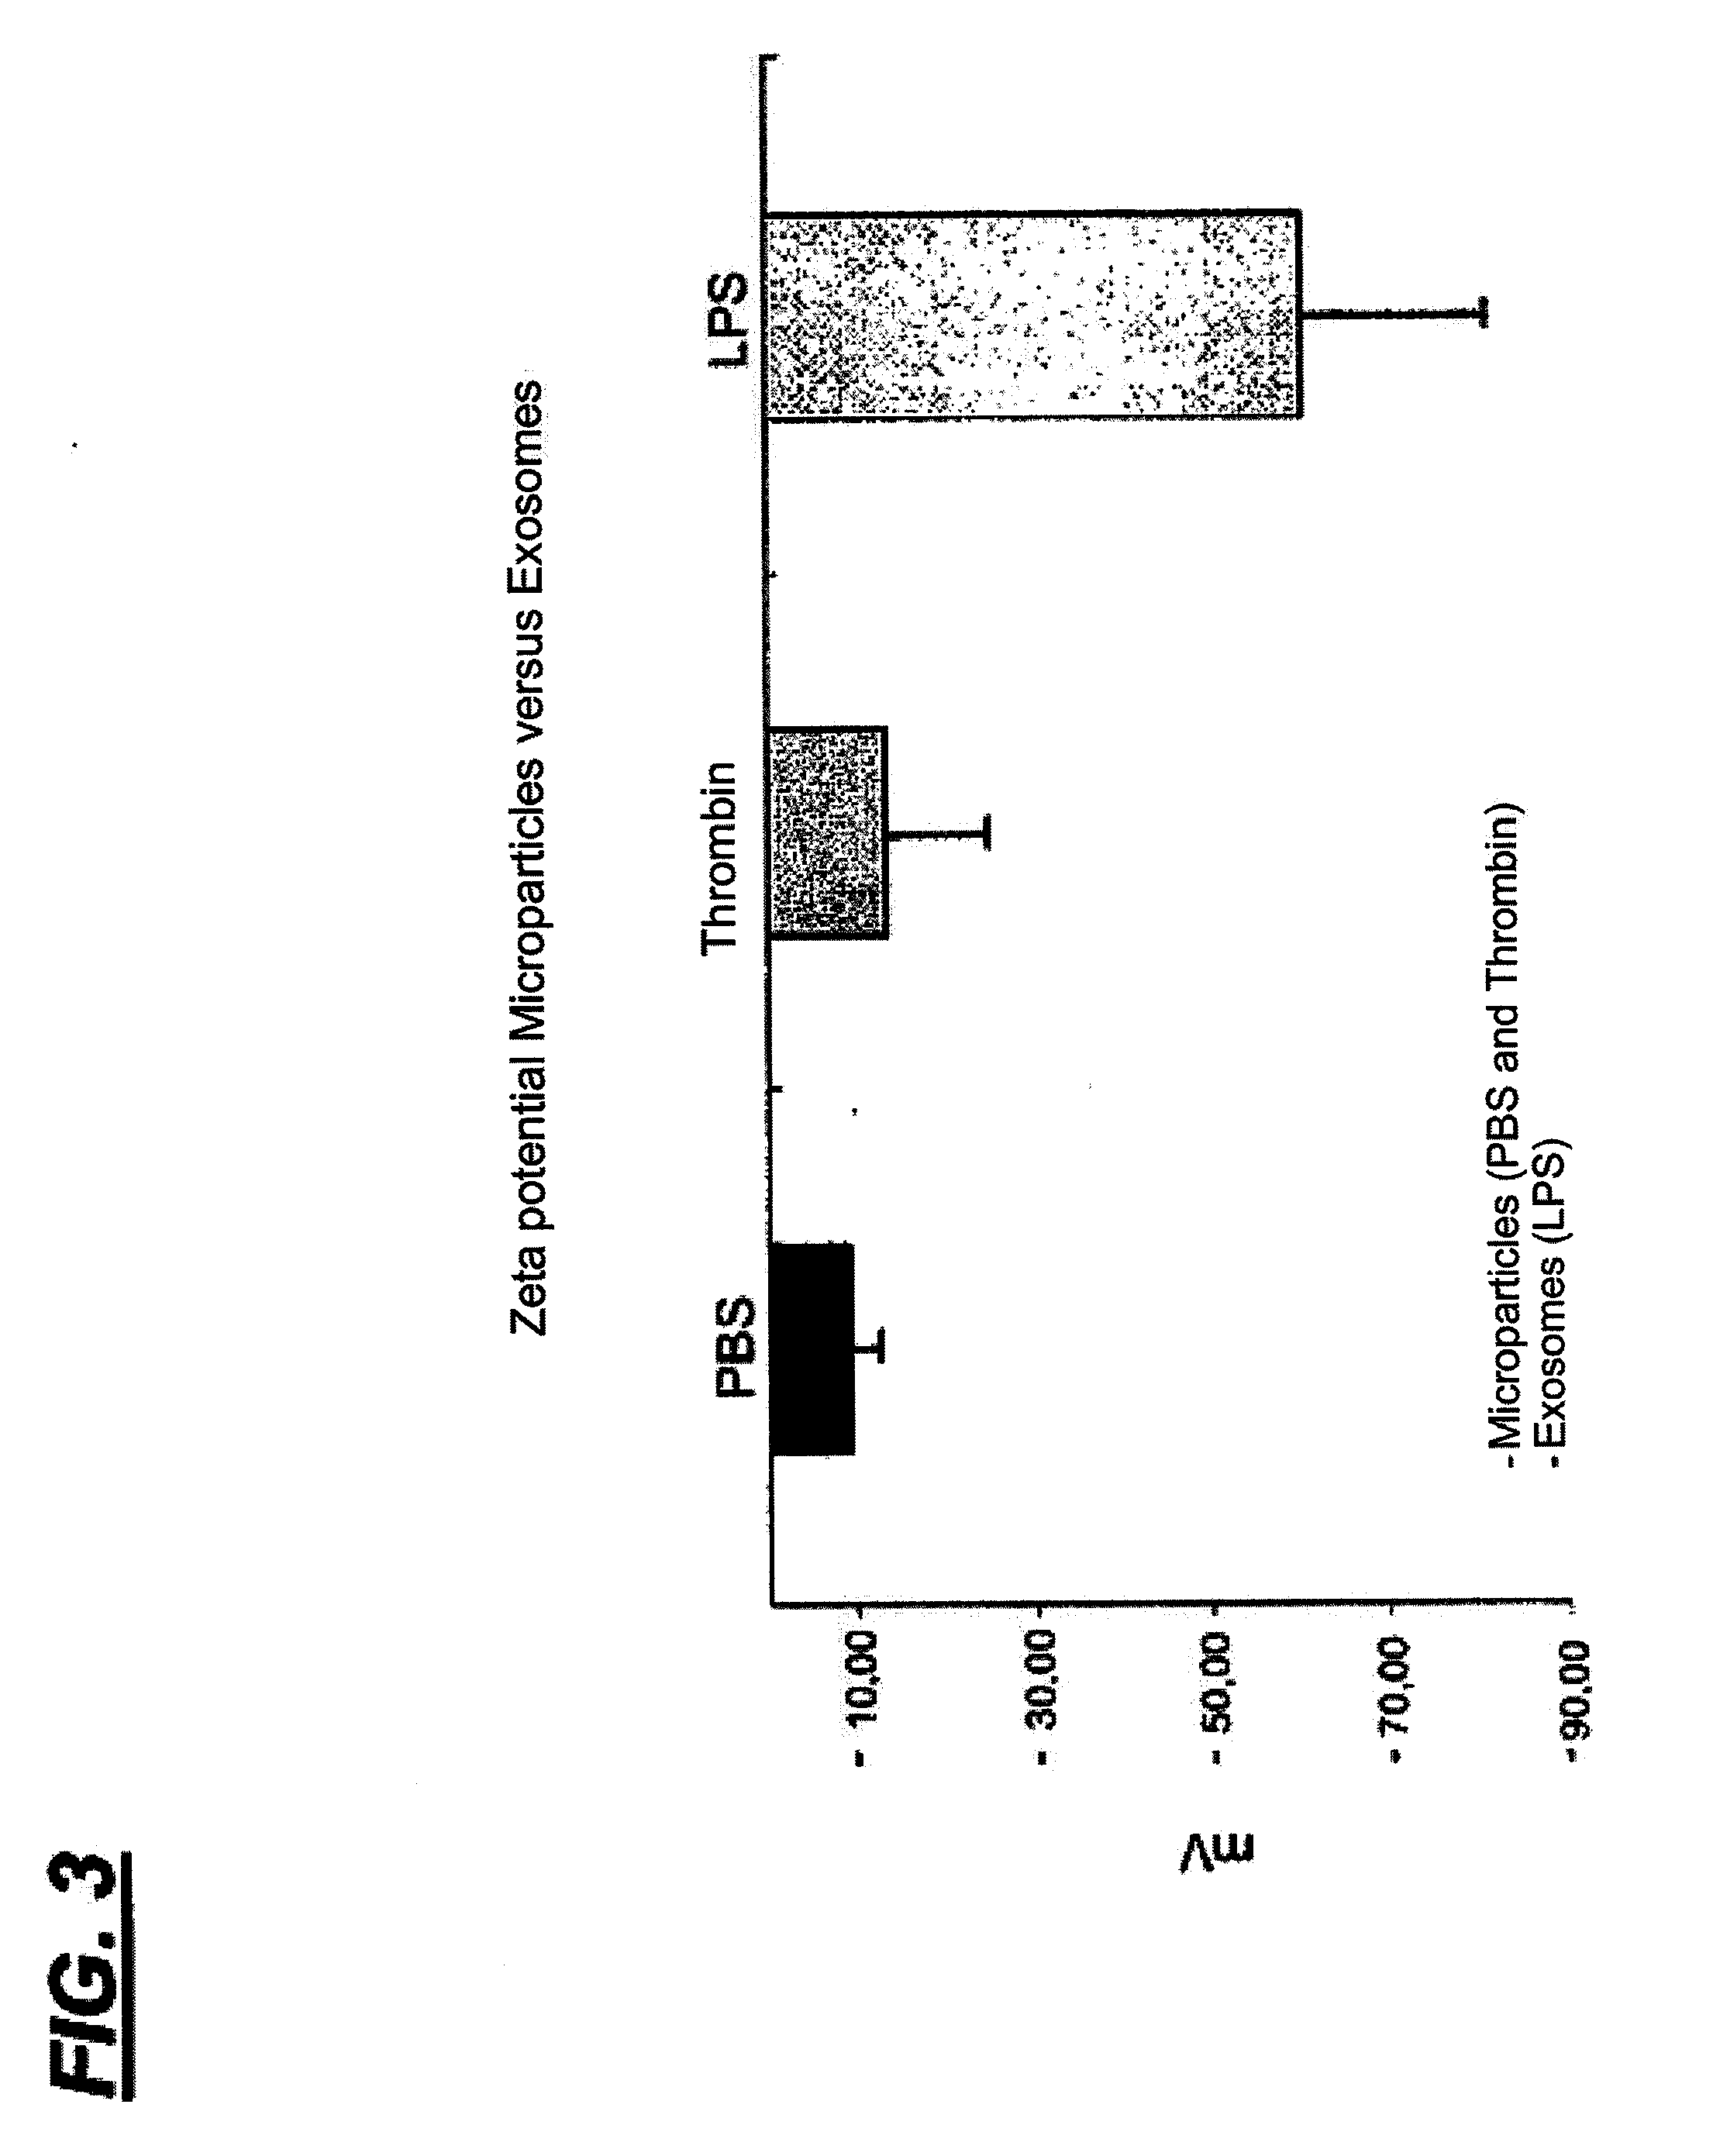 Method for isolating exosomes from biological solutions using iron oxide nanoparticles